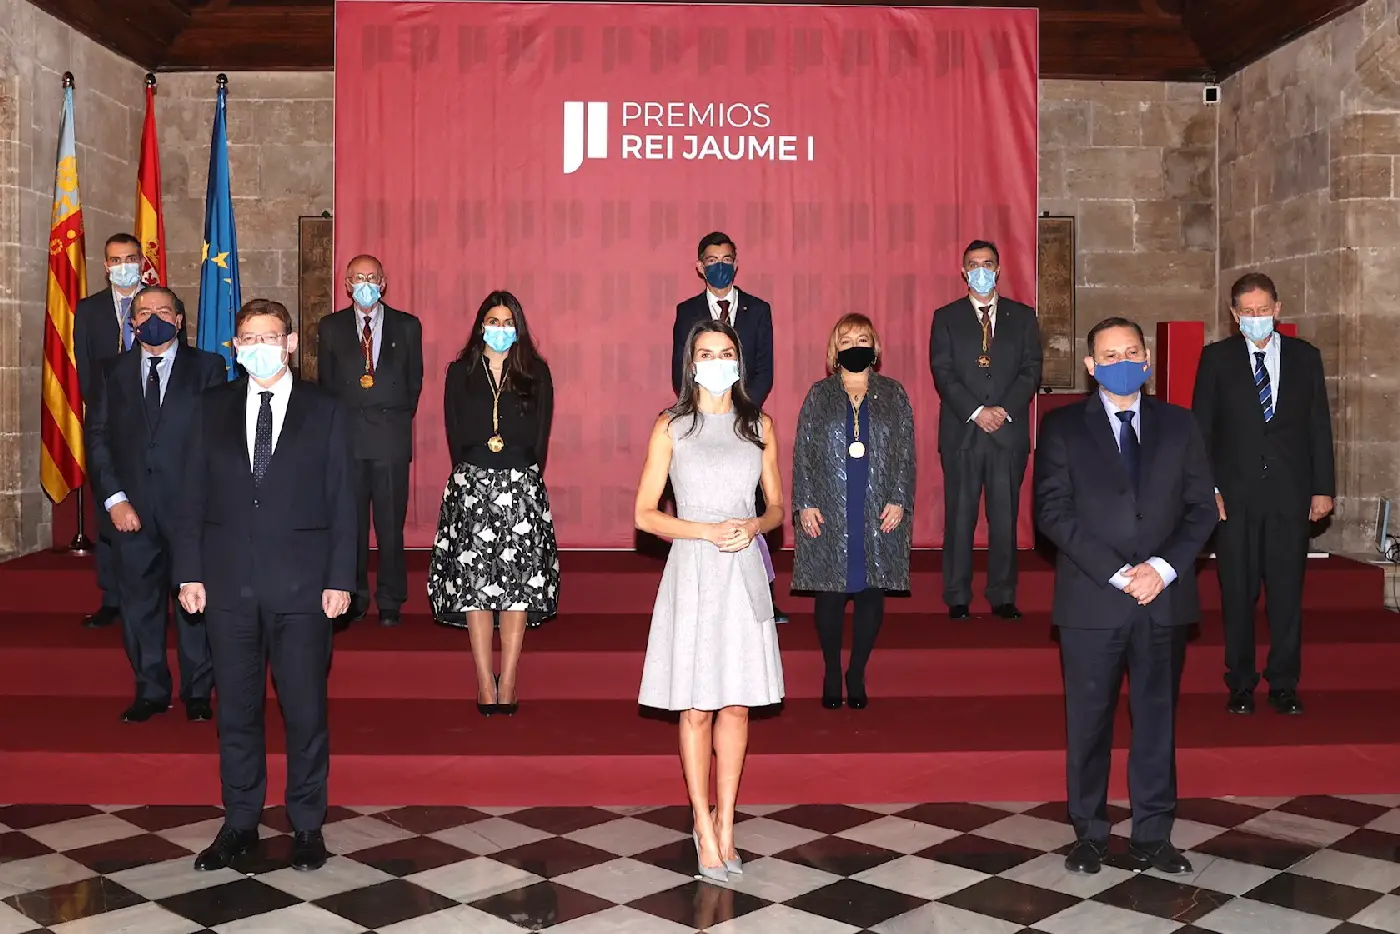 Queen Letizia of Spain with King Jaime I Award winners